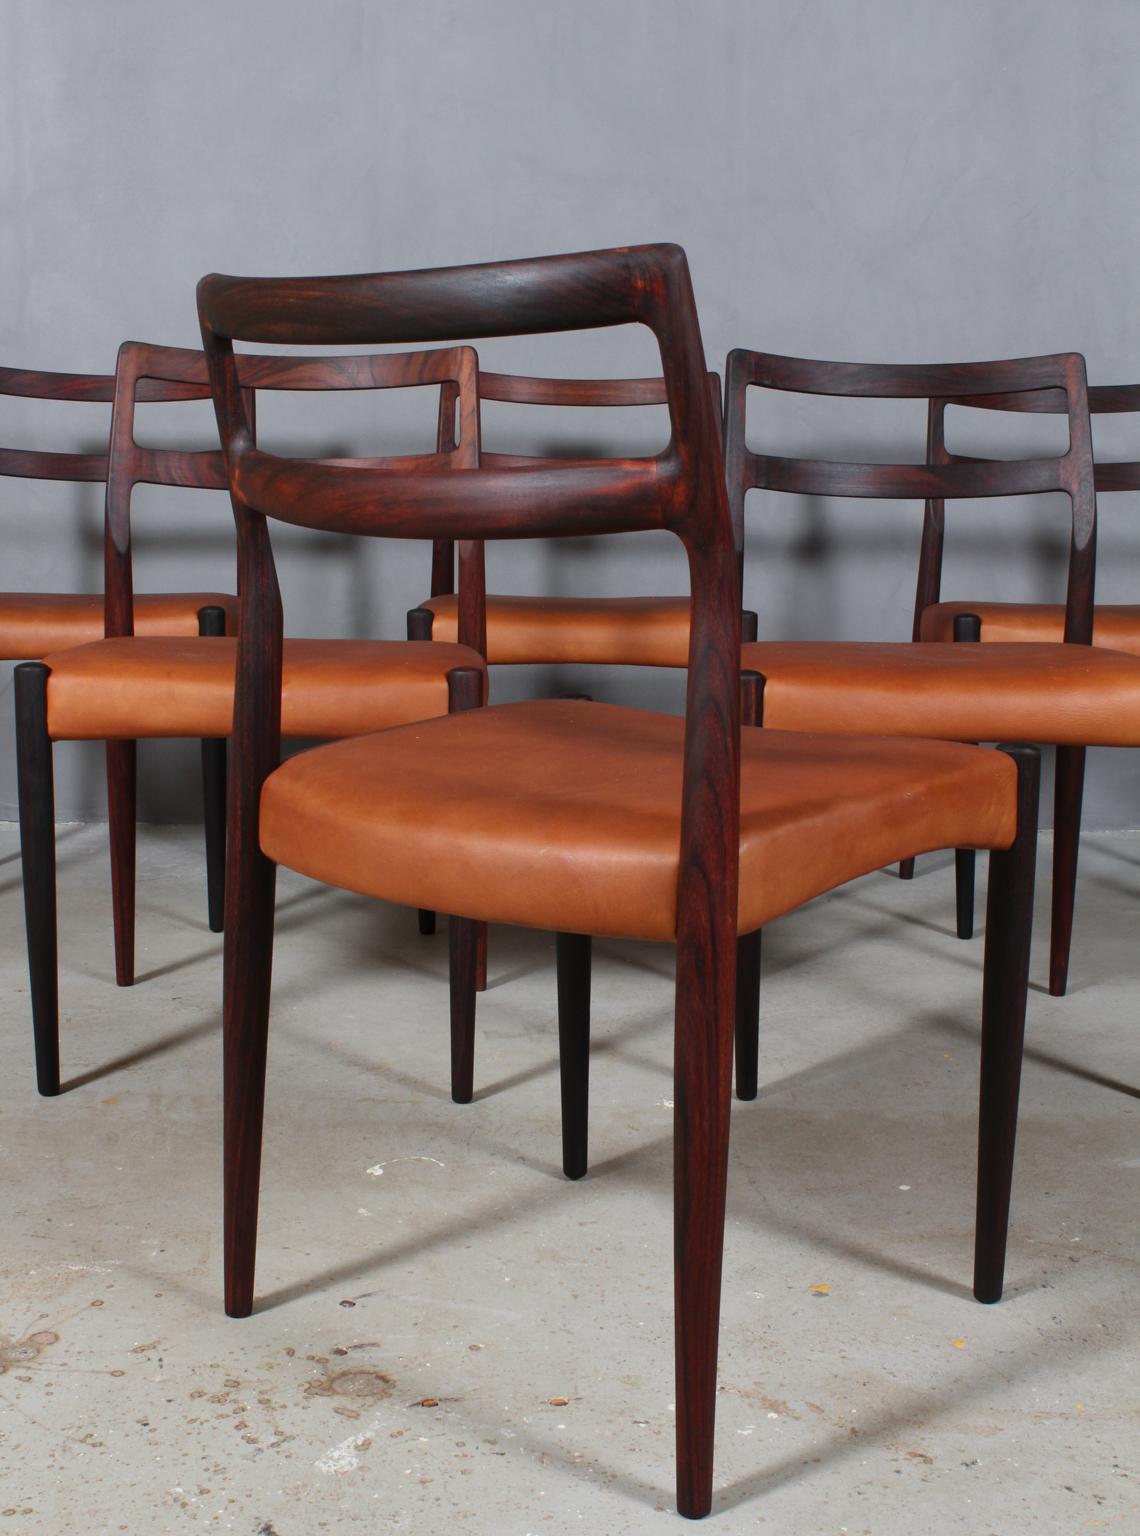 Mid-20th Century Johannes Andersen Six Dining Chairs, Model Anna, Rosewood and Leather Upholstery